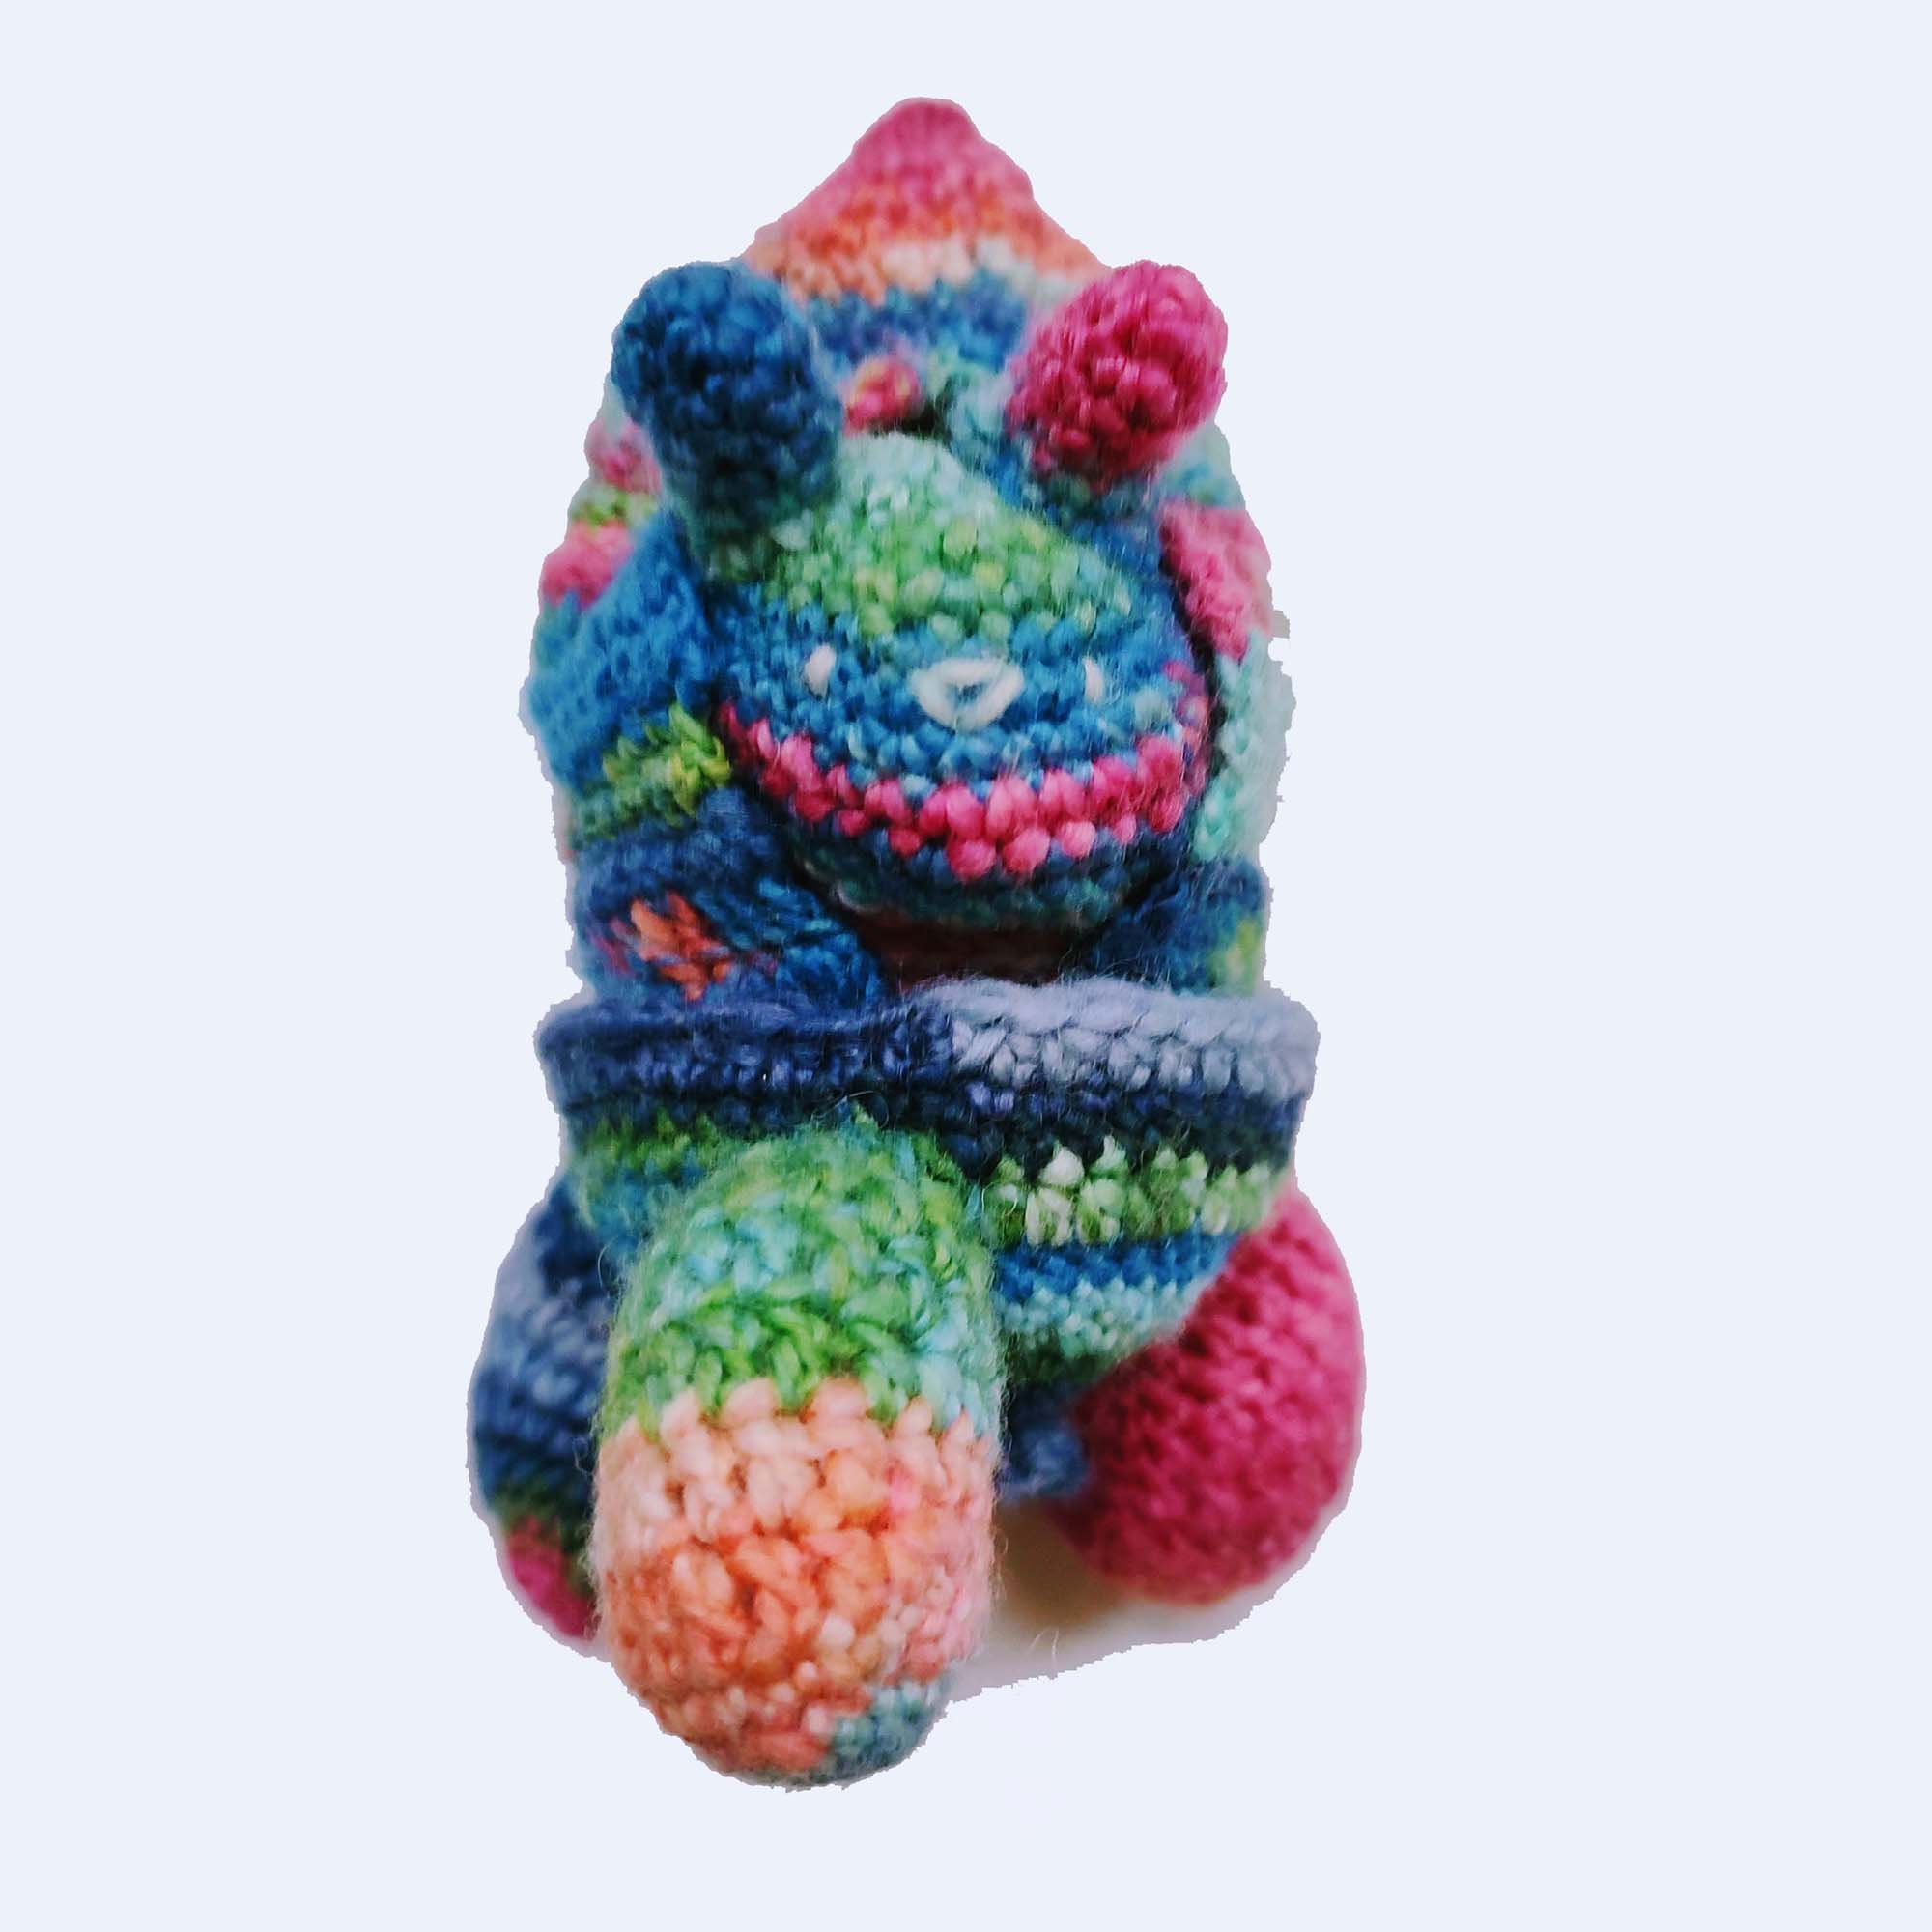 rainbow-colored crocheted toy bun alien rocket ship with ears popping out